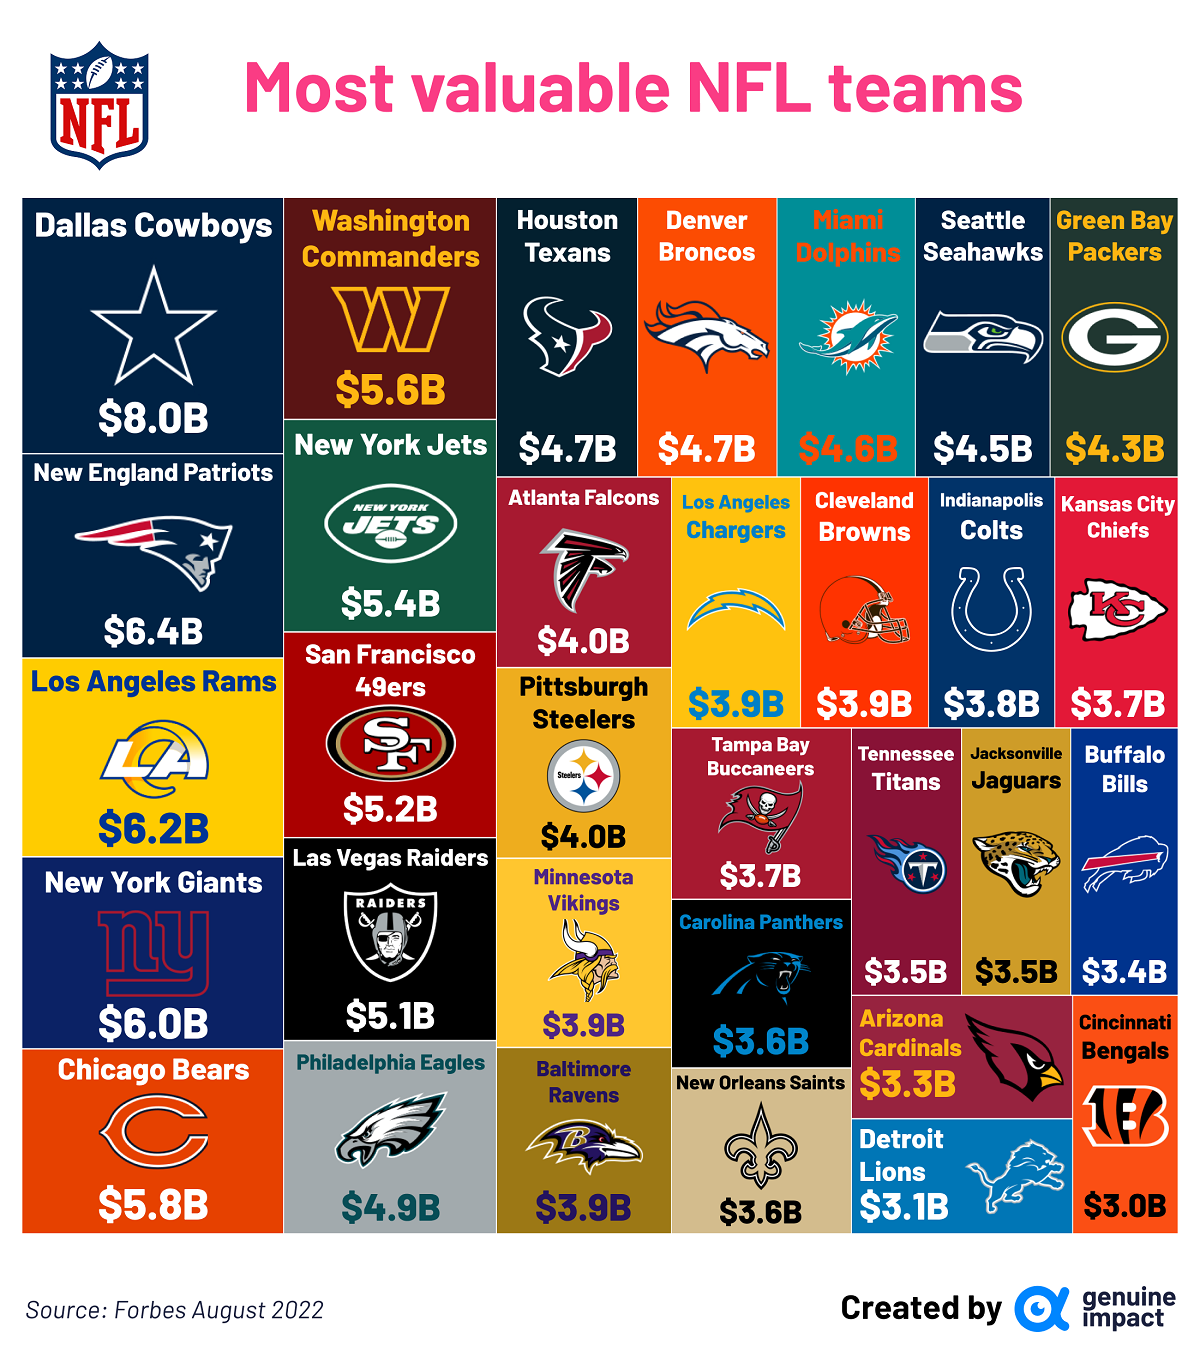 visualizing the most valuable NFL teams in 2022